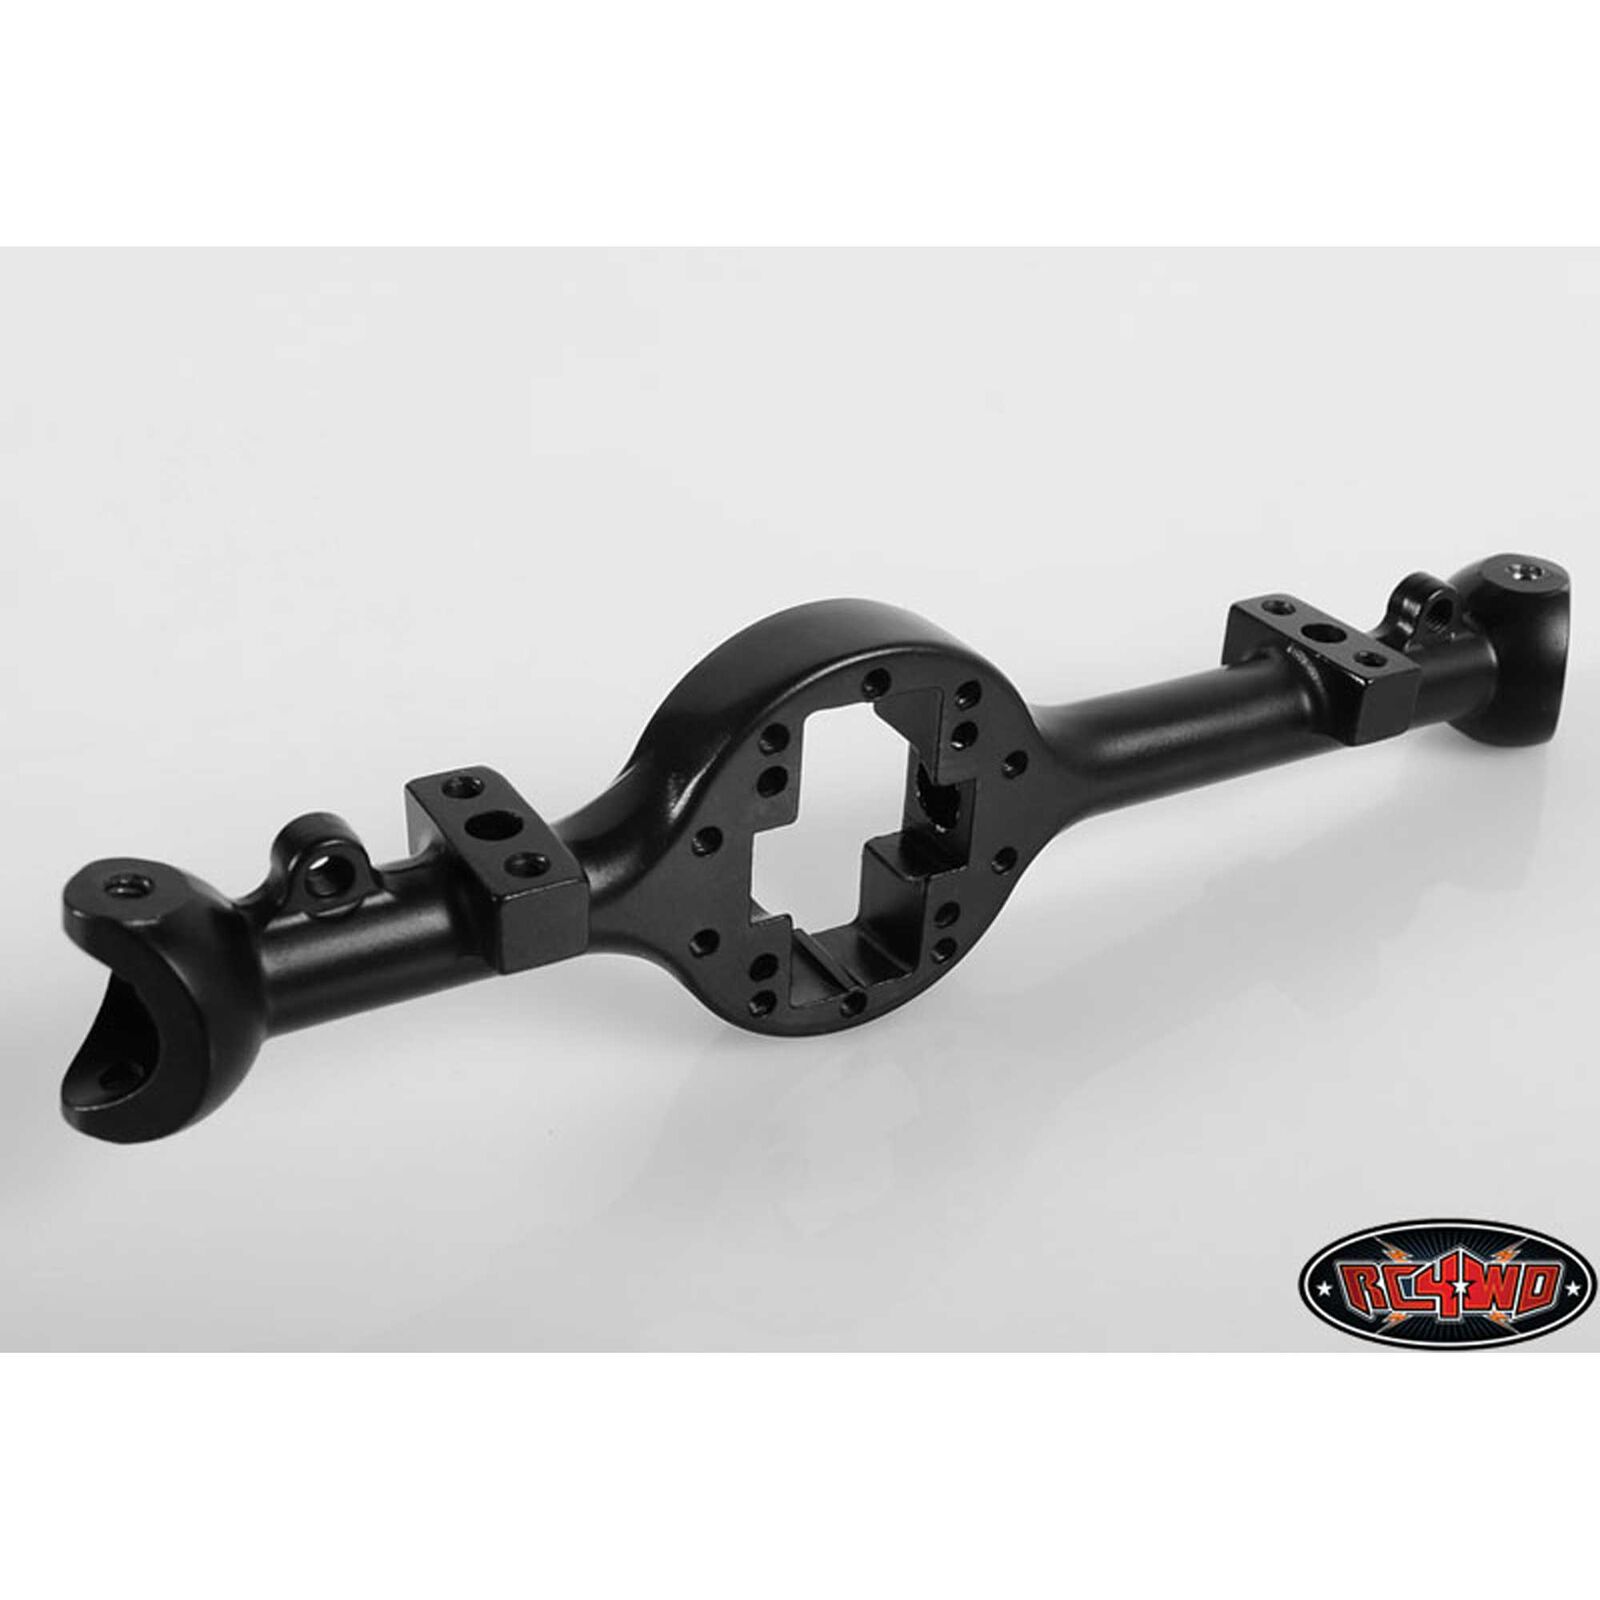 Front Replacement Case Housing Cast: Yota II Axle